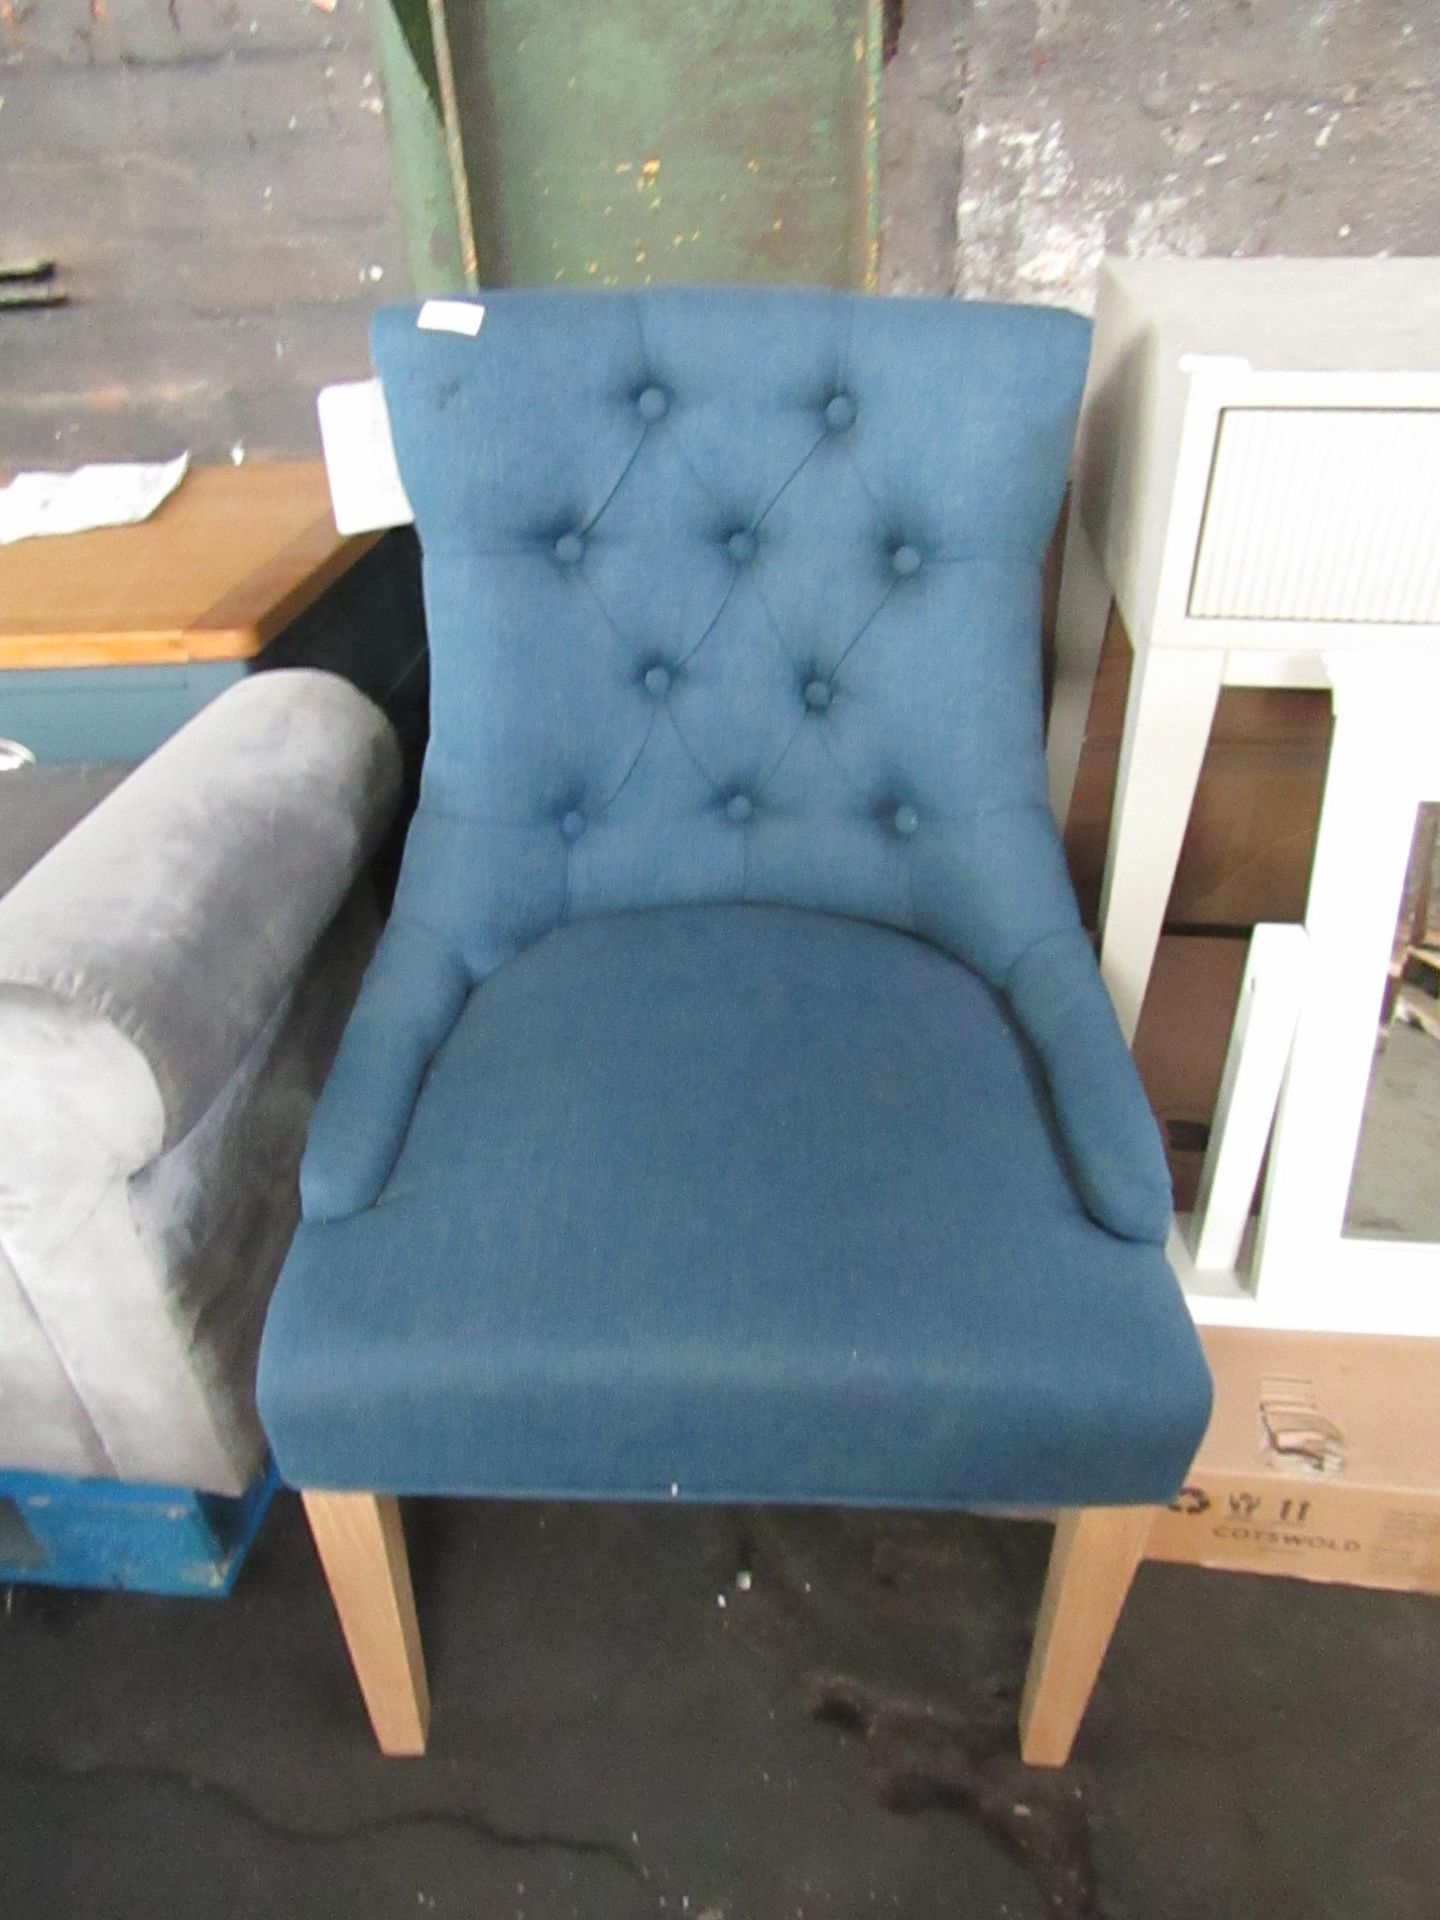 Cotswold Company Primrose Upholstered Button Back Chair - Navy 5 RRP Â£185.00 - This item looks to